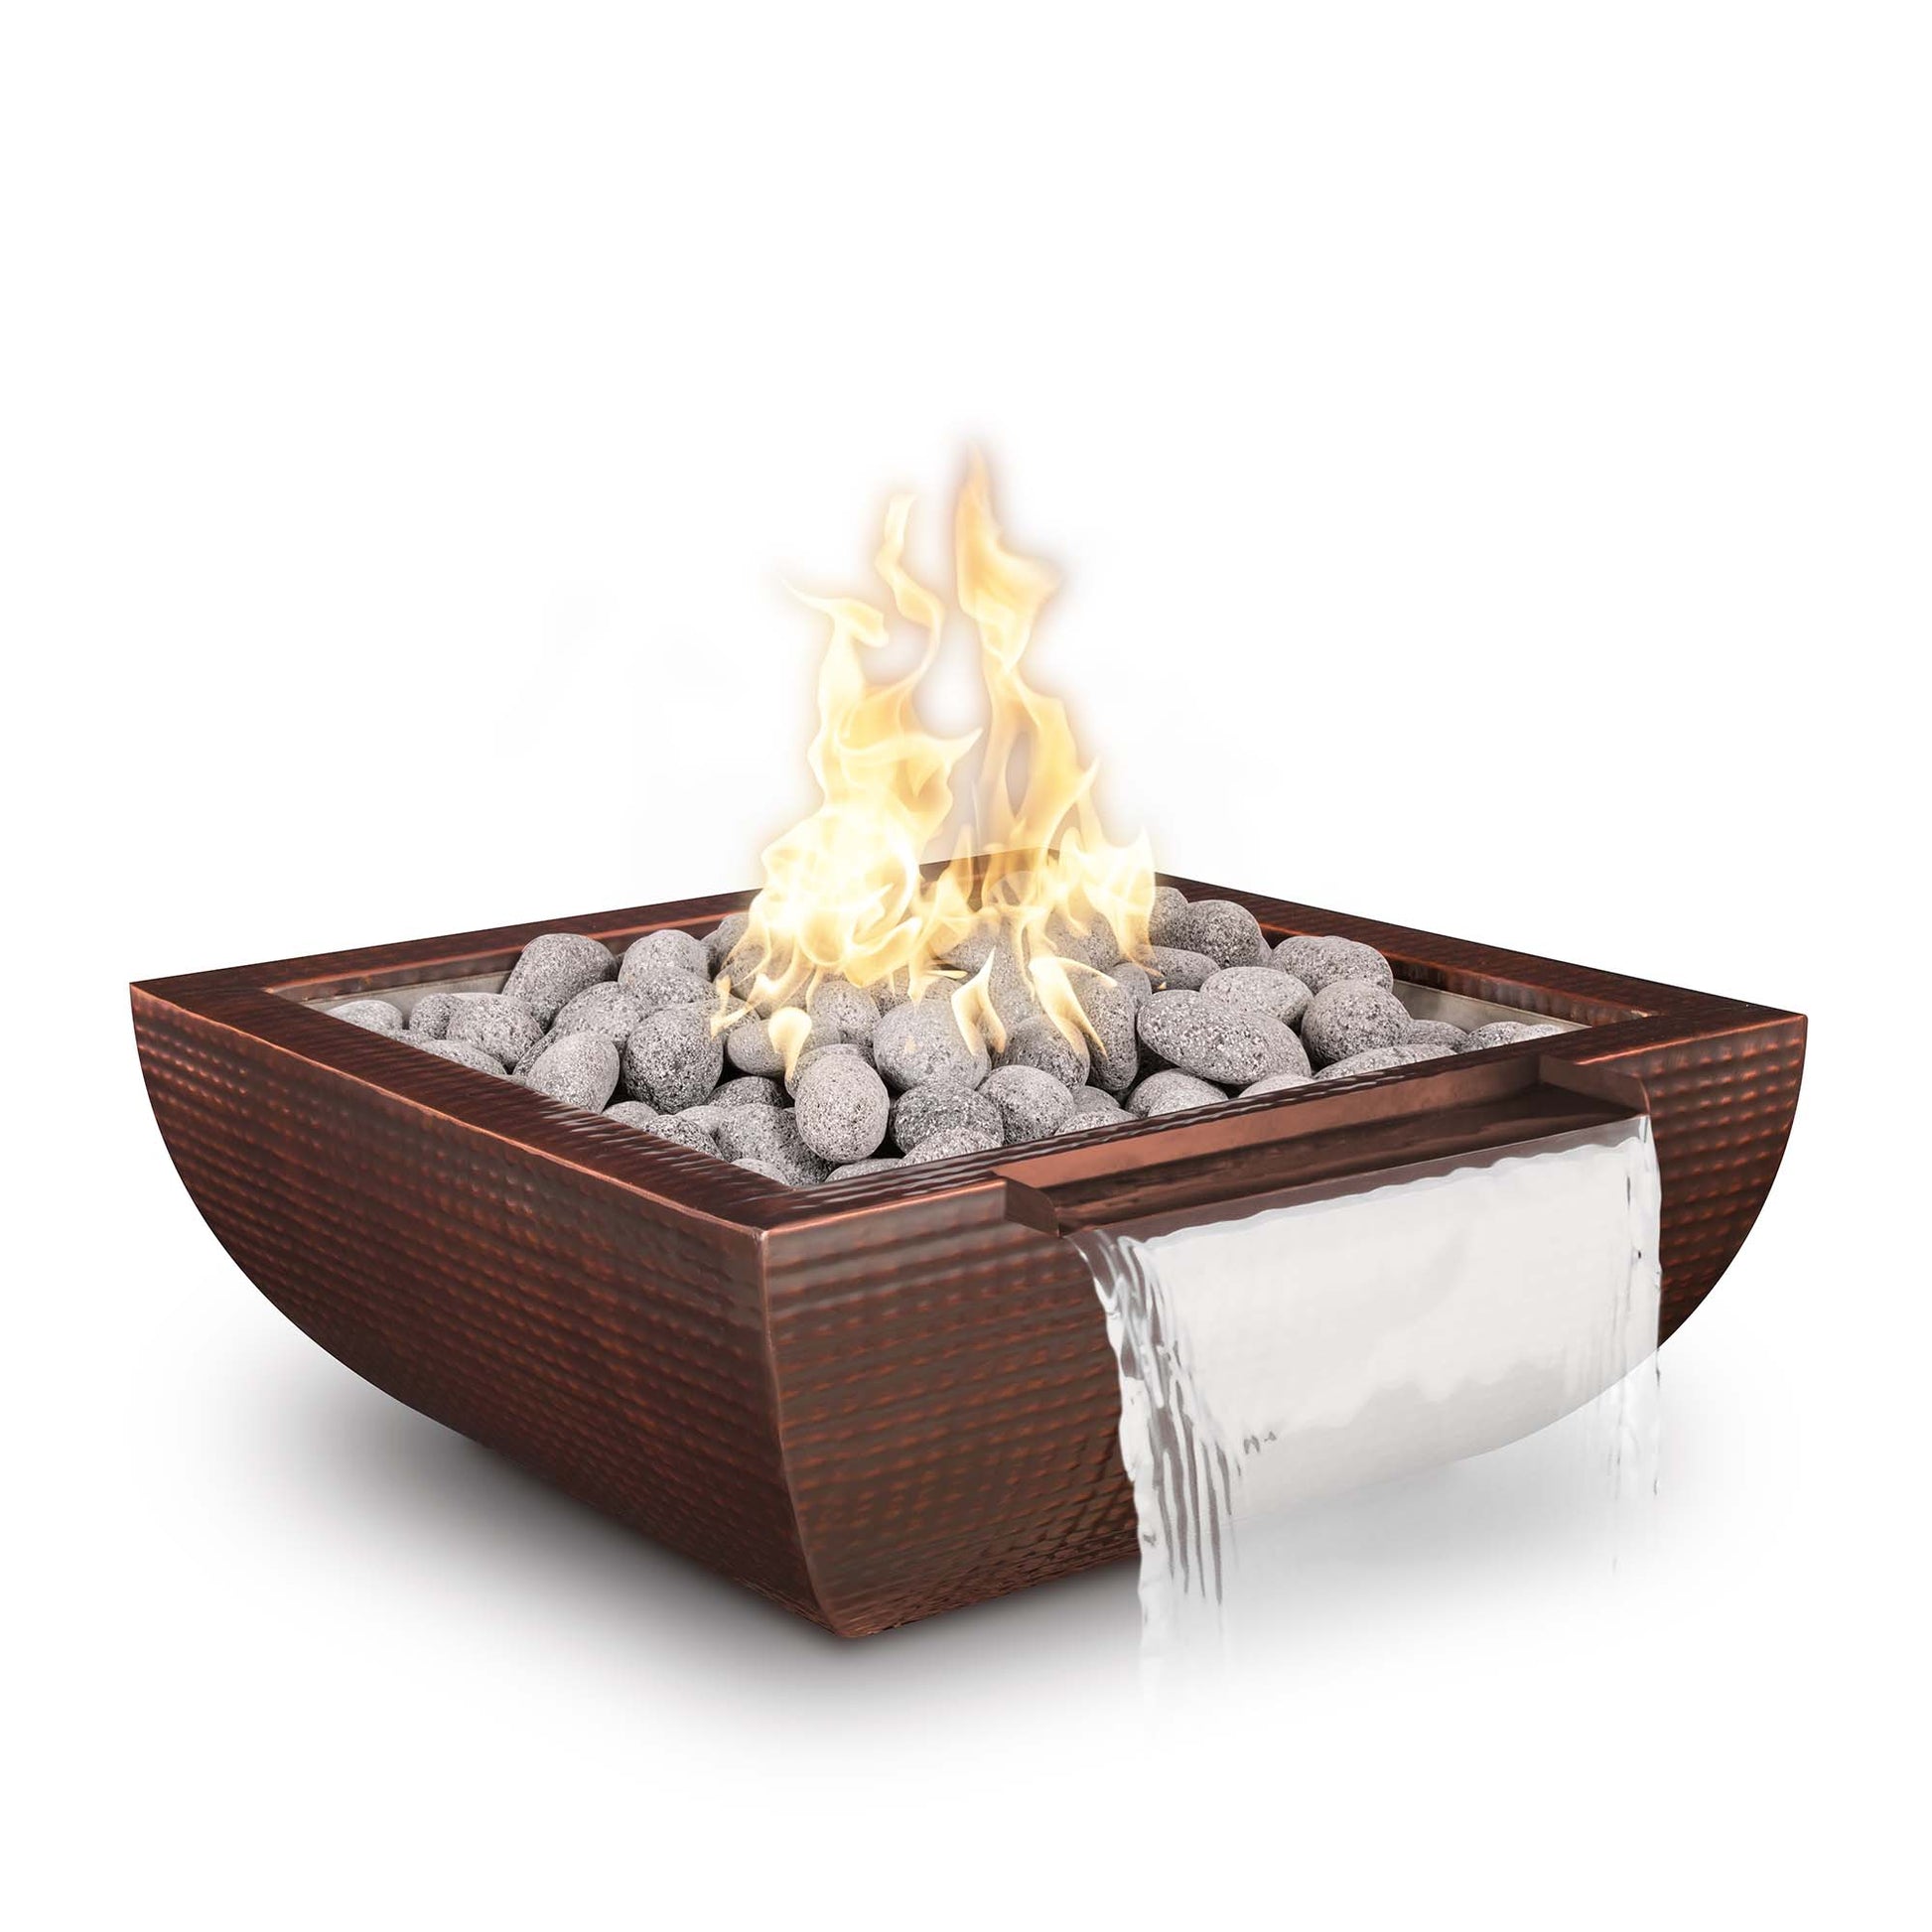 The Outdoor Plus Avalon Wide Spill 24" White Powder Coated Metal Liquid Propane Fire & Water Bowl with Match Lit with Flame Sense Ignition